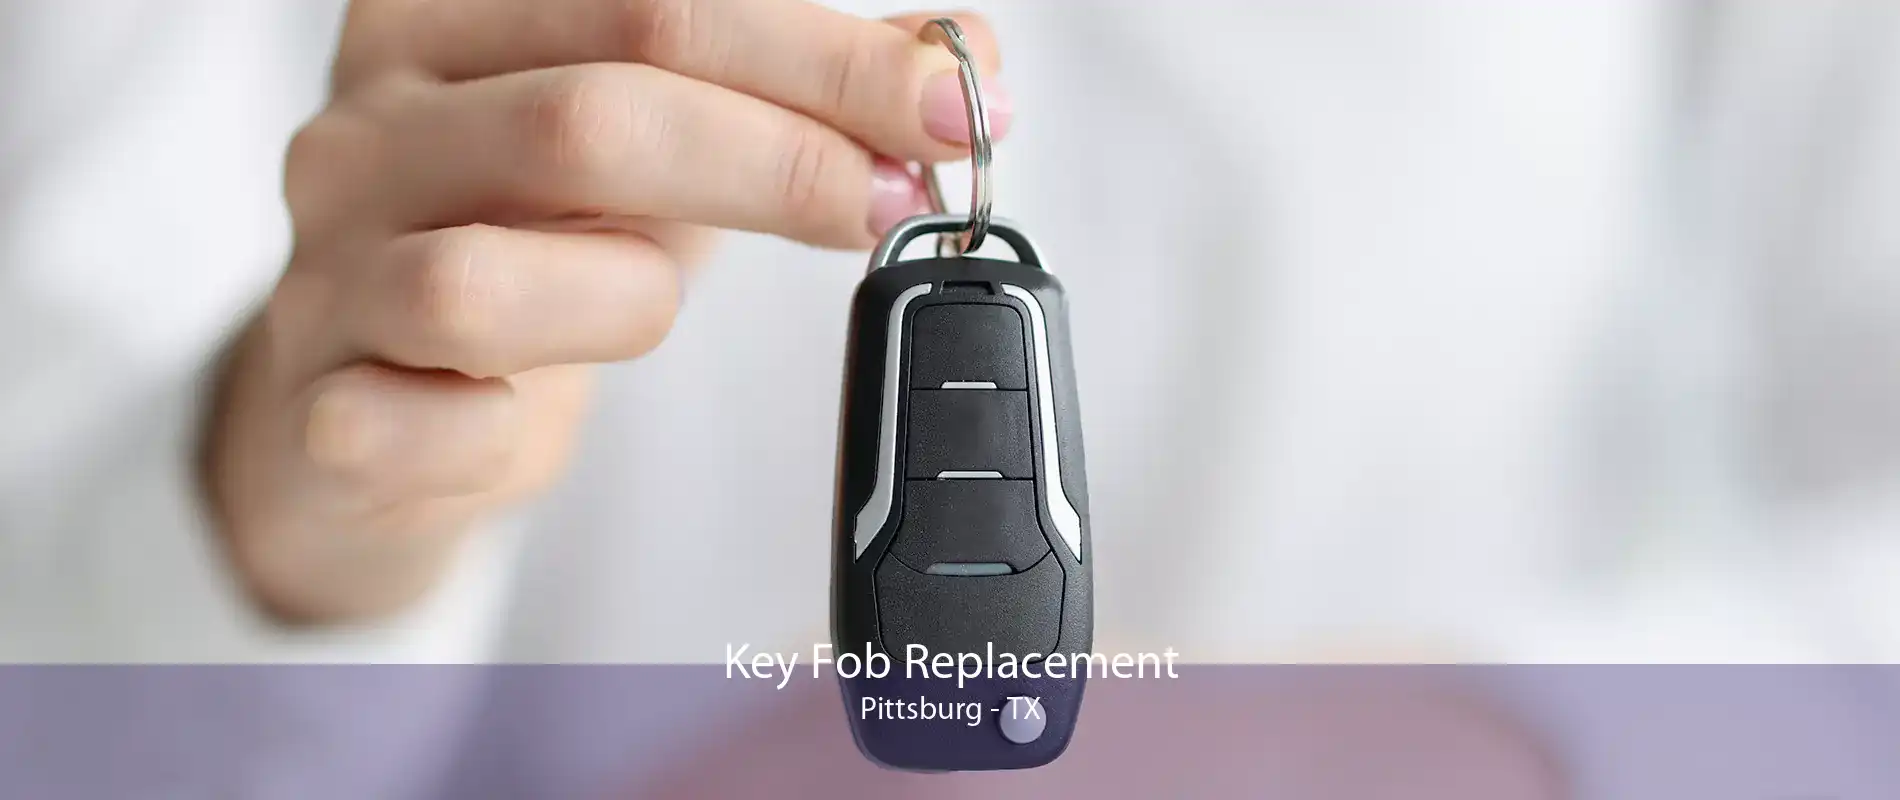 Key Fob Replacement Pittsburg - TX